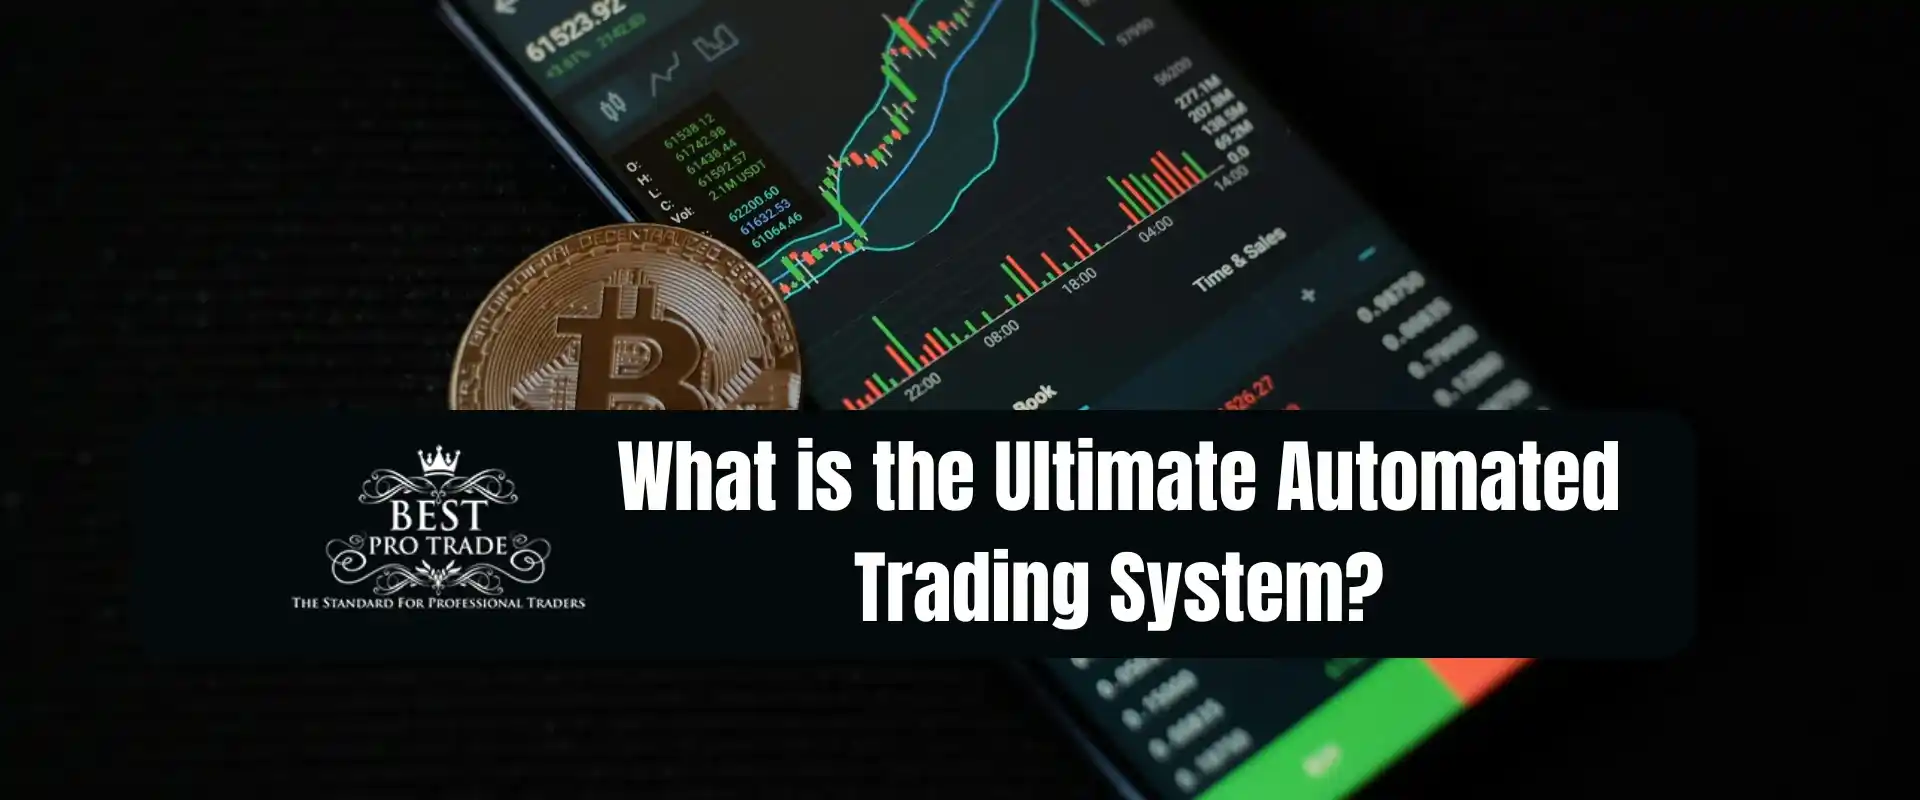 Ultimate Automated Trading